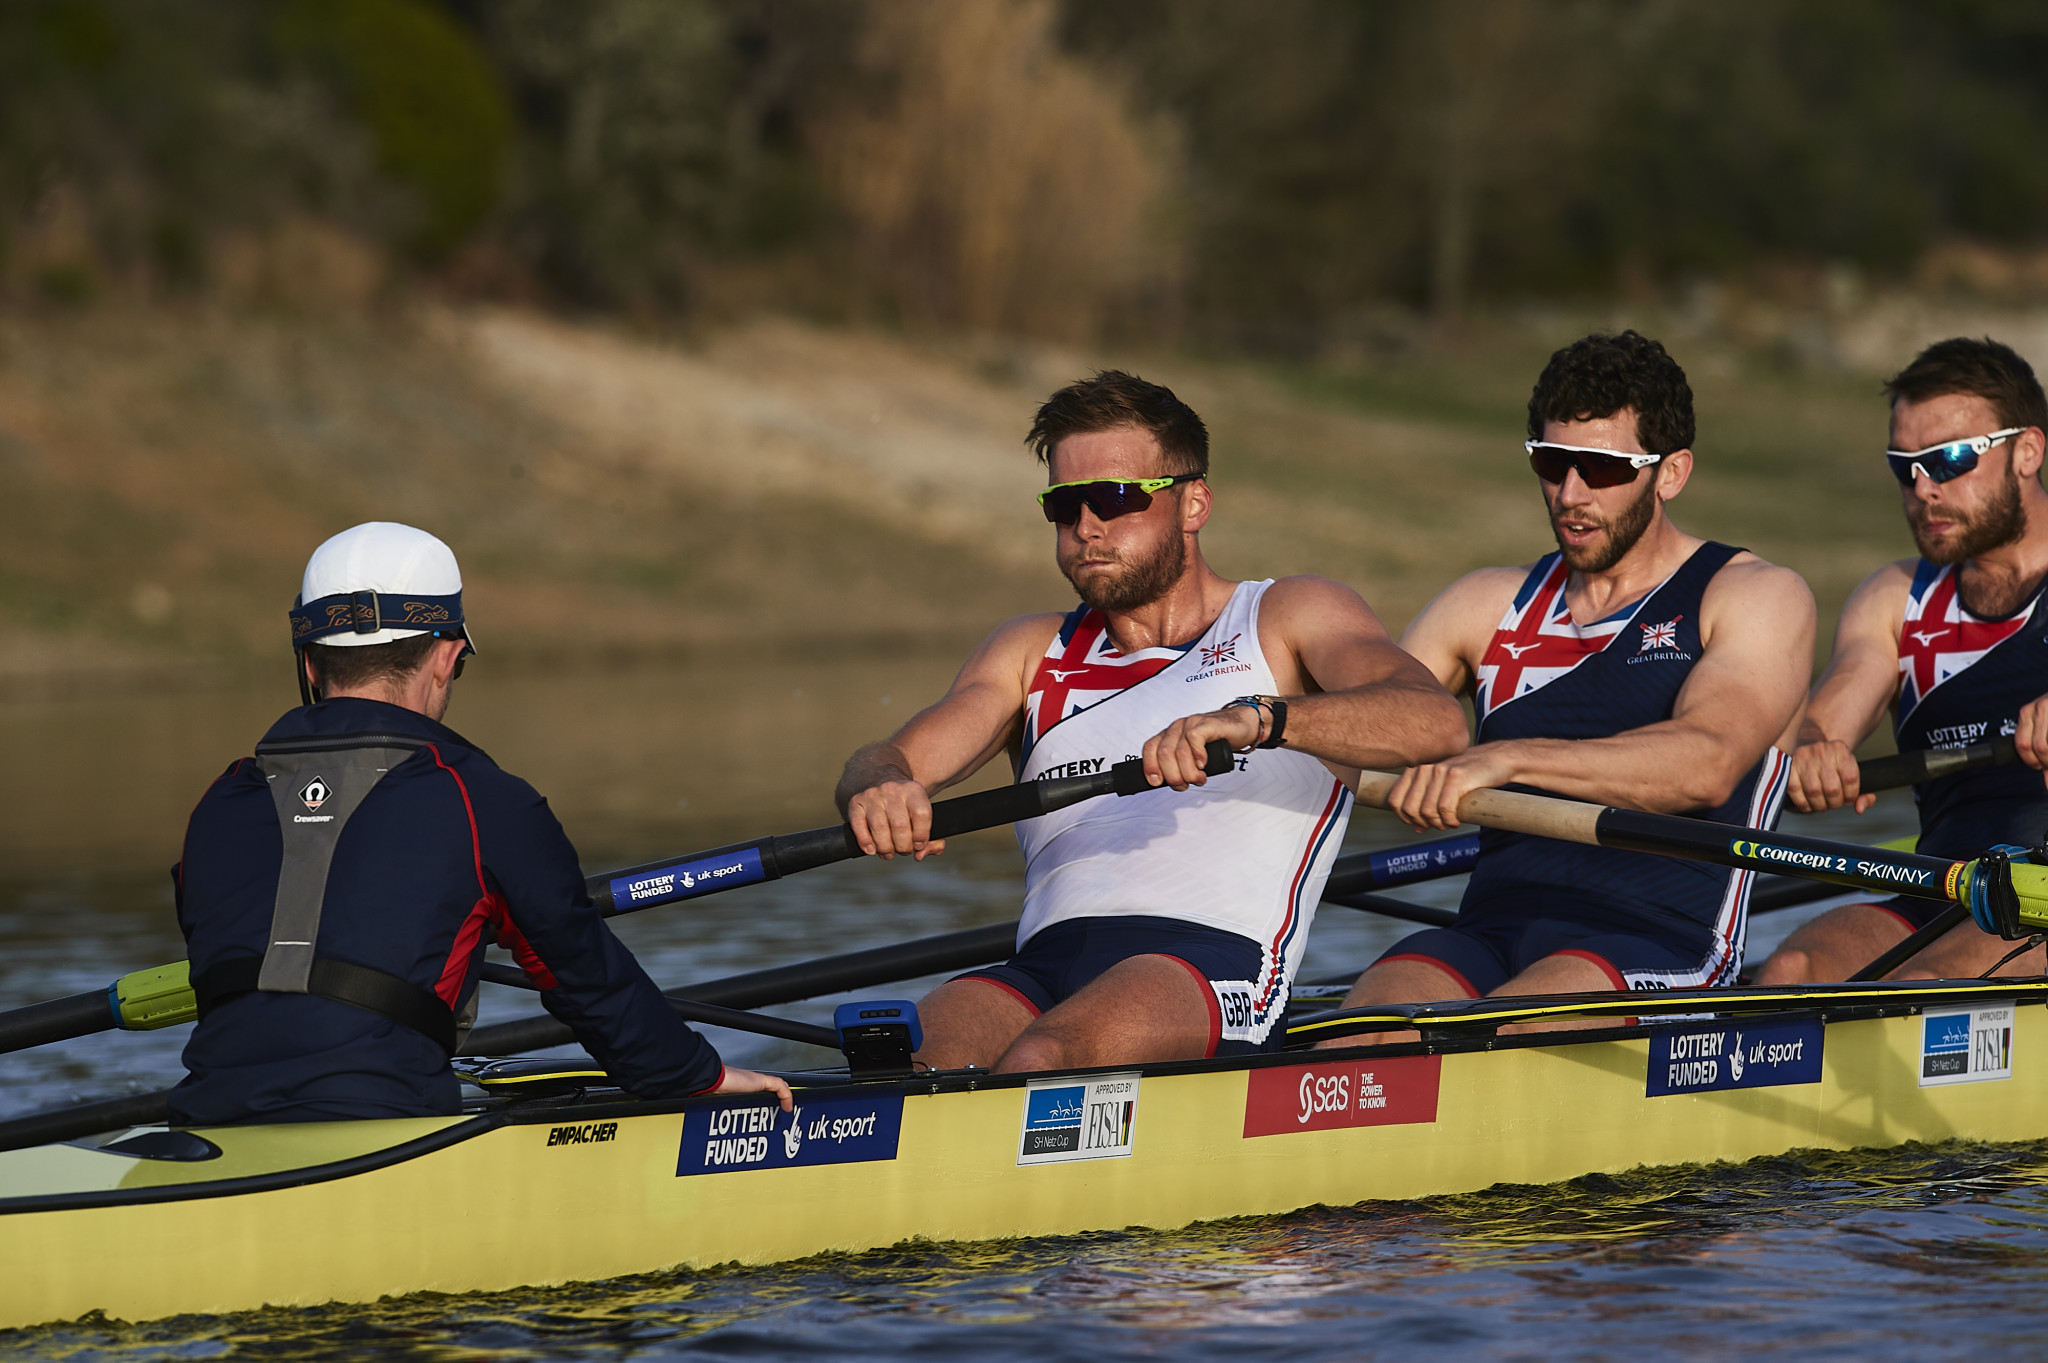 British Rowing extends analytics deal with SAS through postponed Tokyo 2020 Olympics